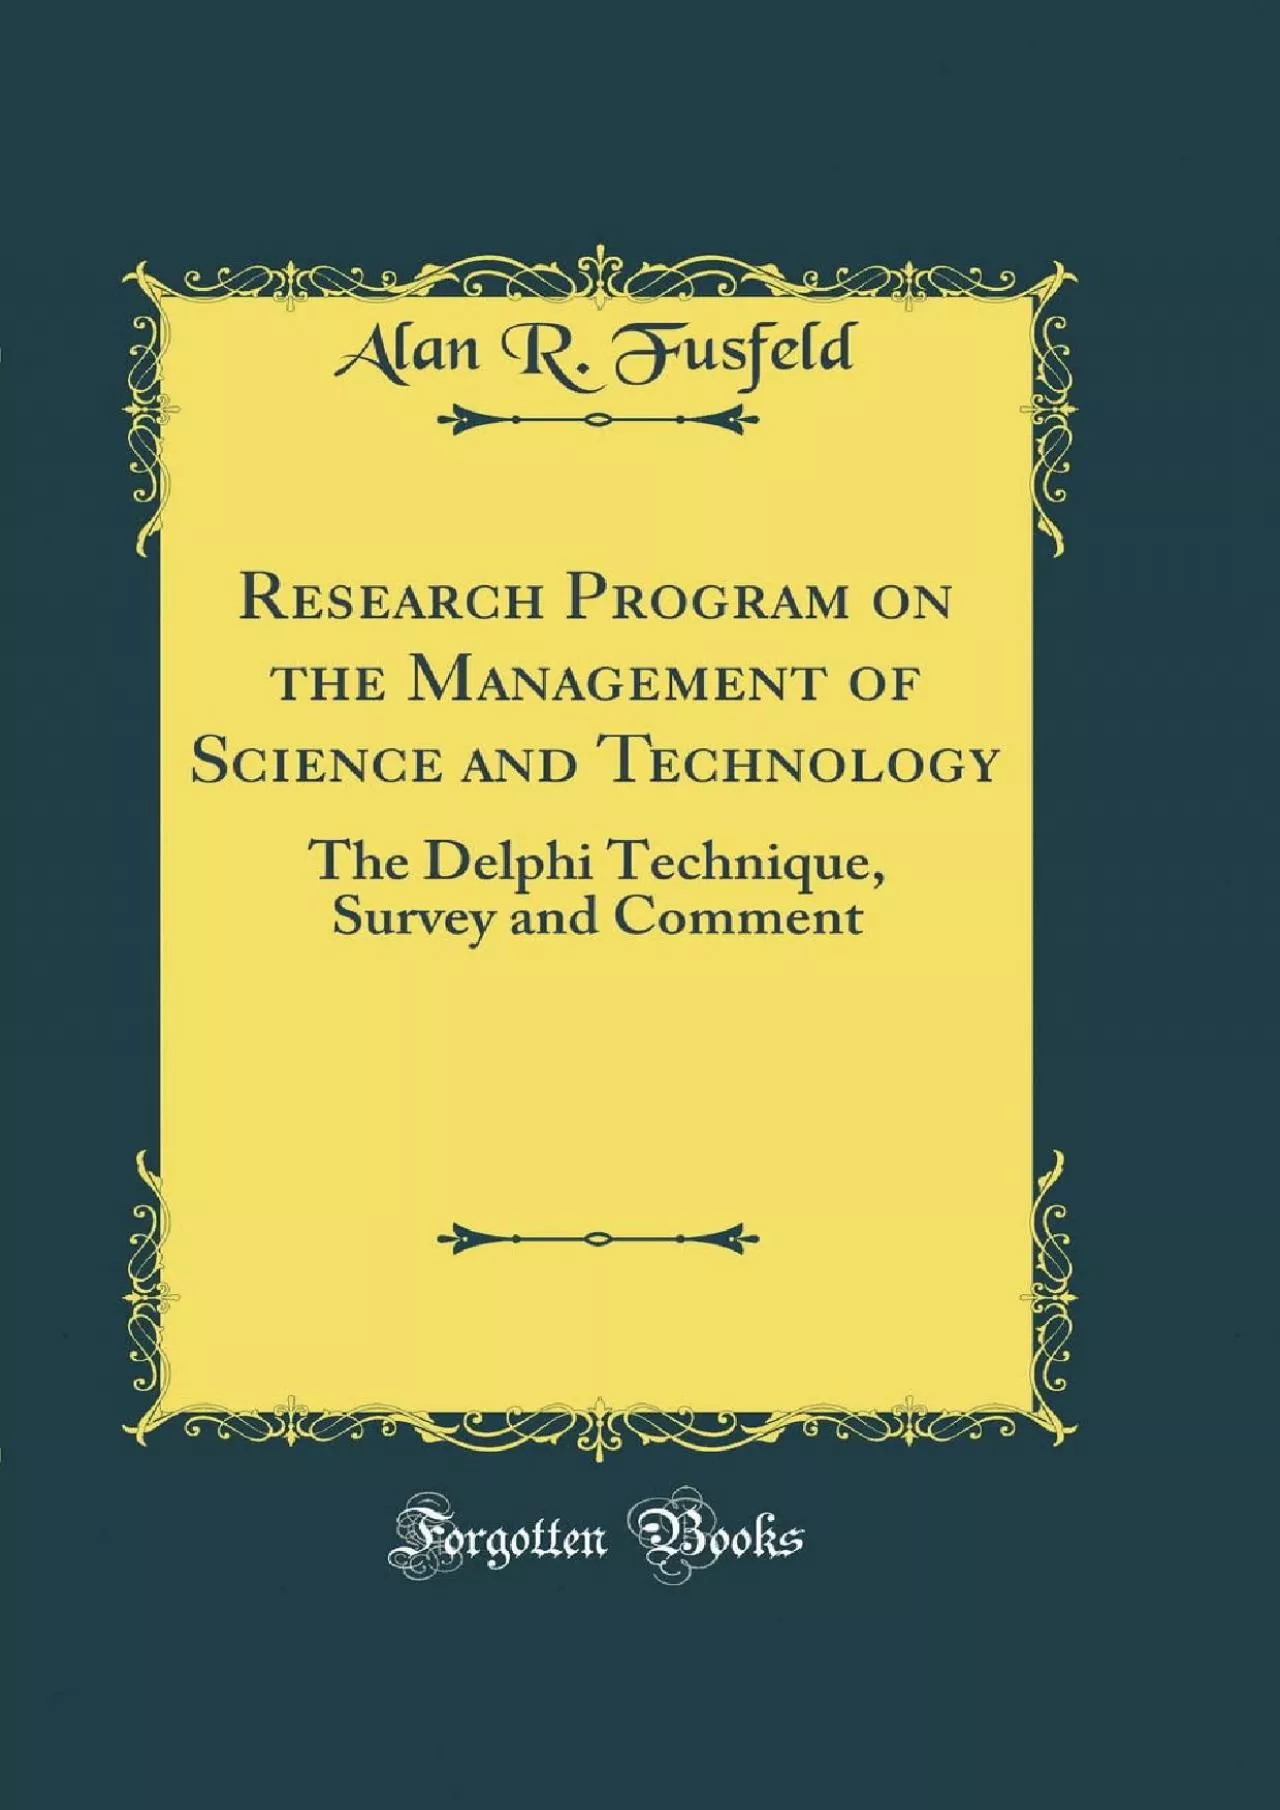 [FREE]-Research Program on the Management of Science and Technology: The Delphi Technique,